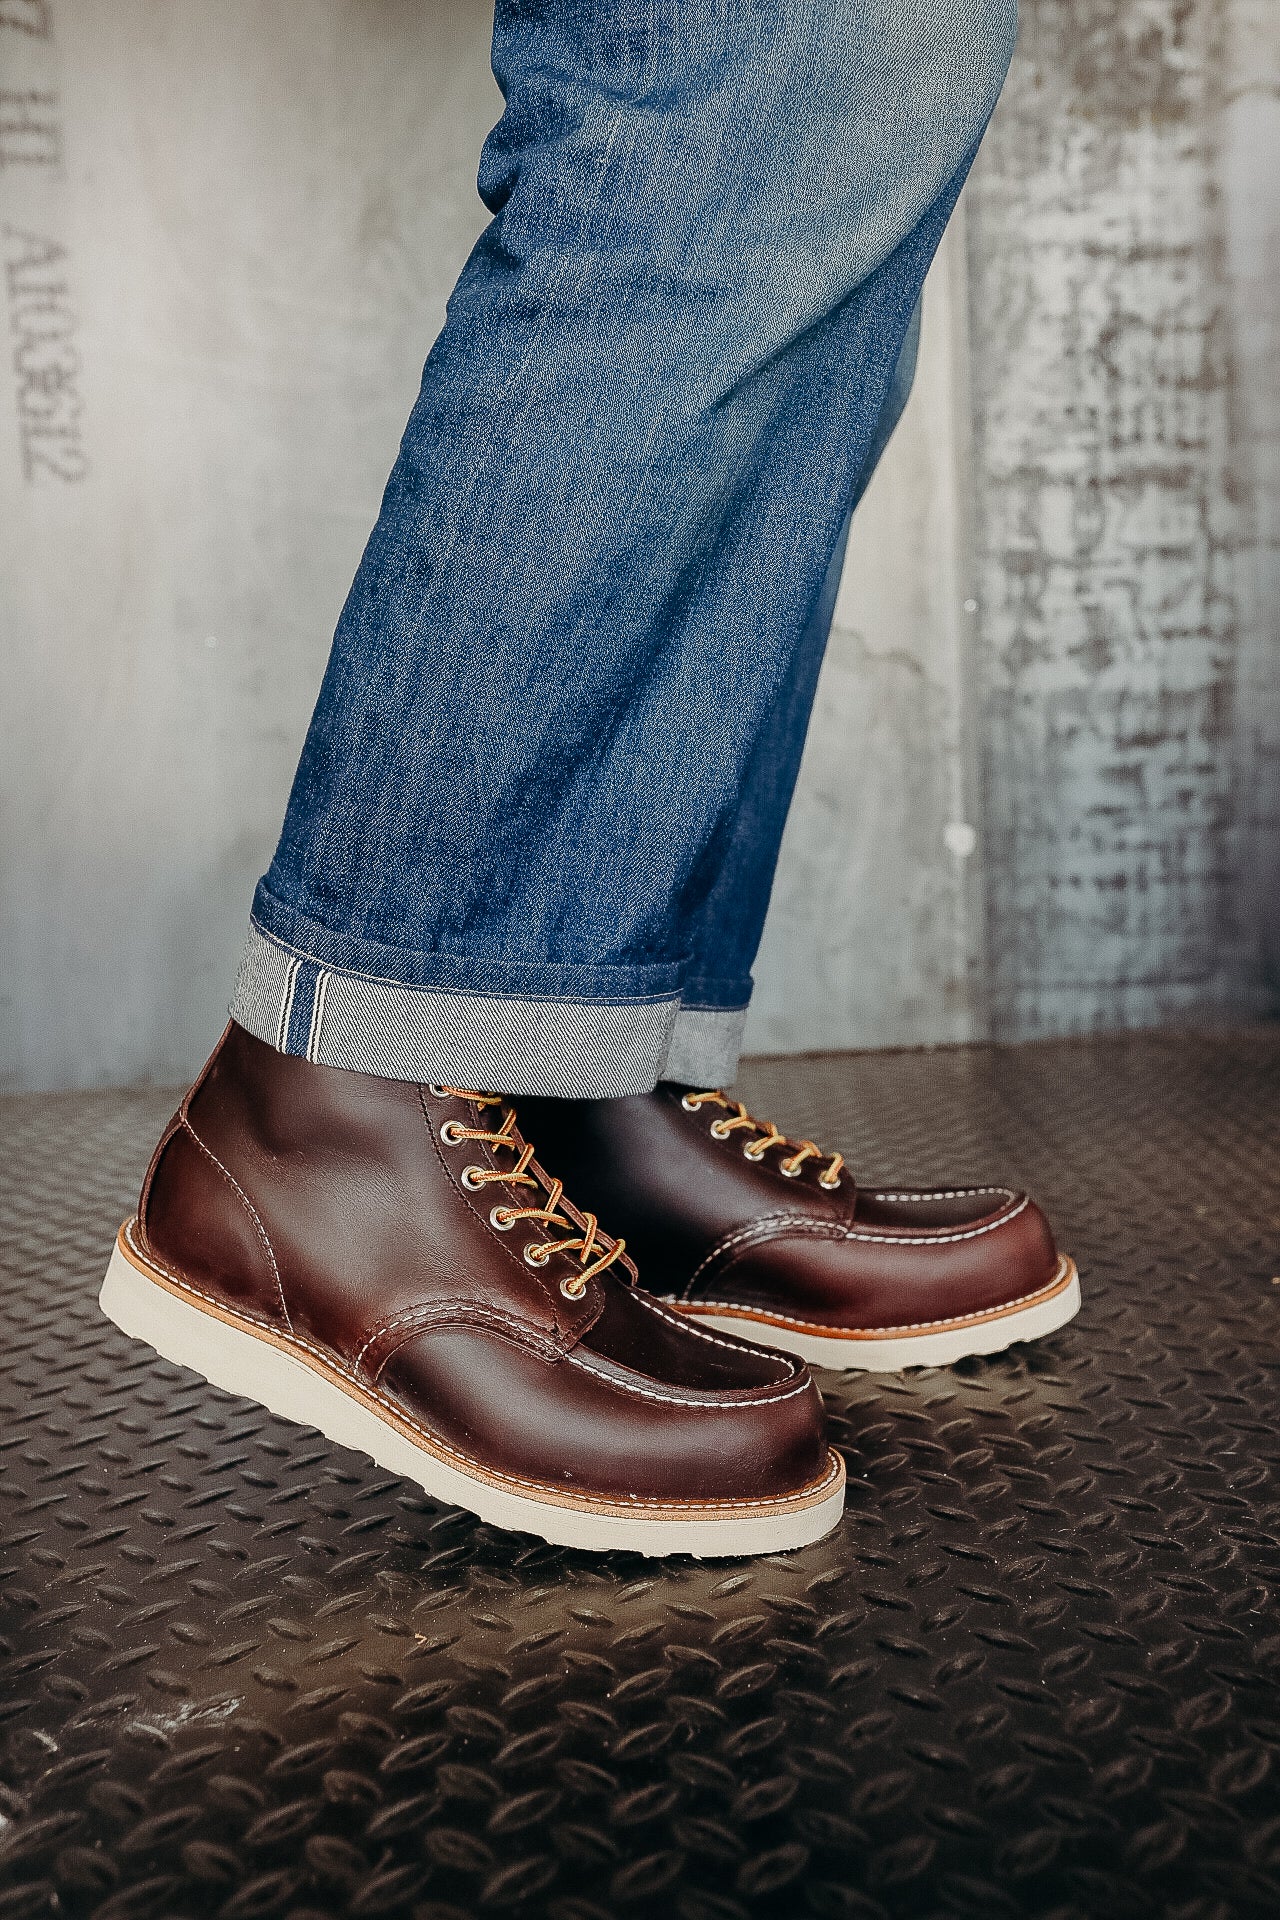 Red Wing Classic Moc Toe Boot Review